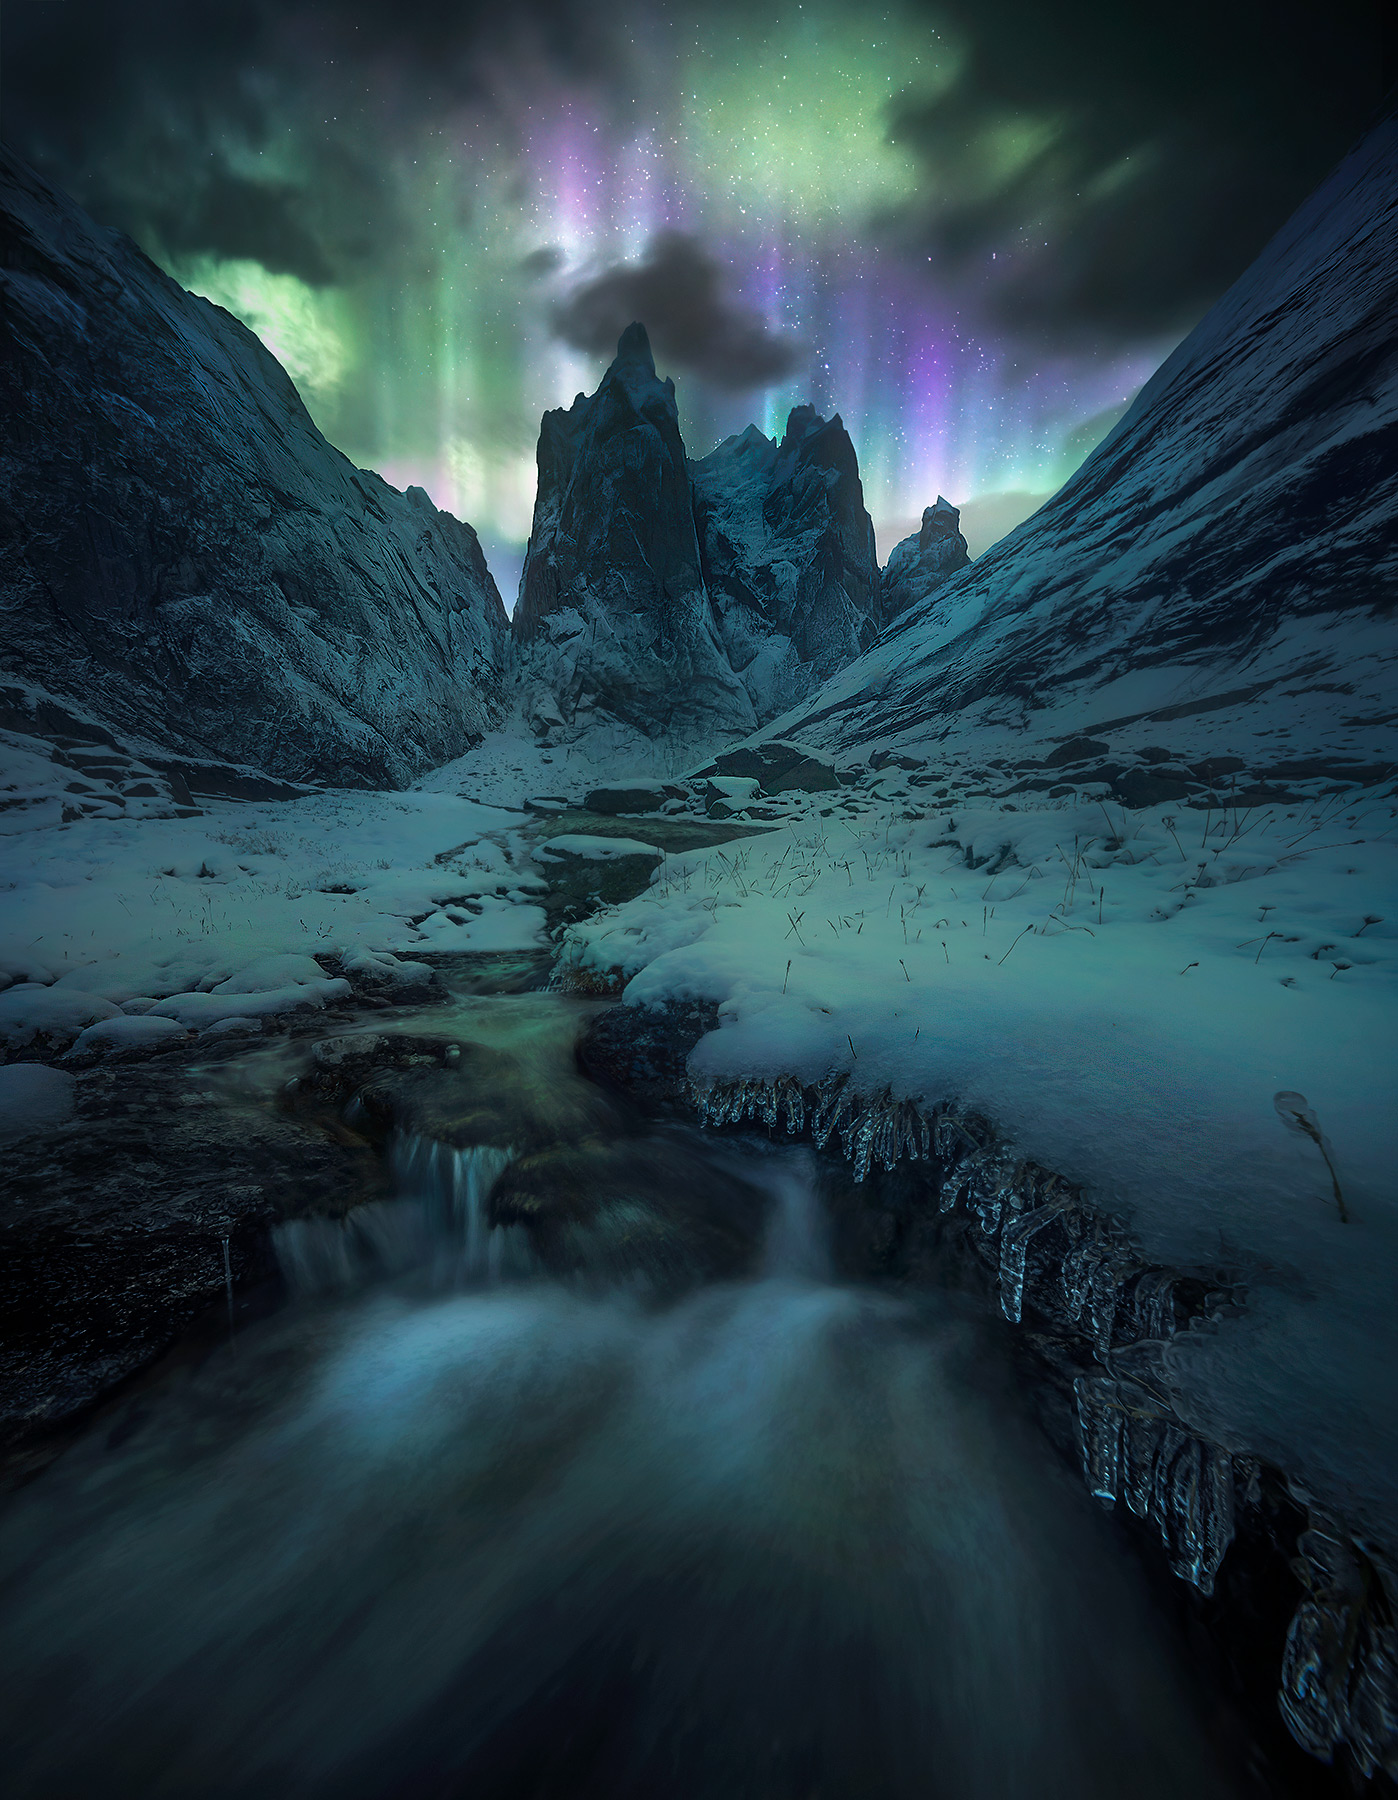 Rushing waters from the first snow of the season form icicles at night under Mt Monolith as the aurora dances.